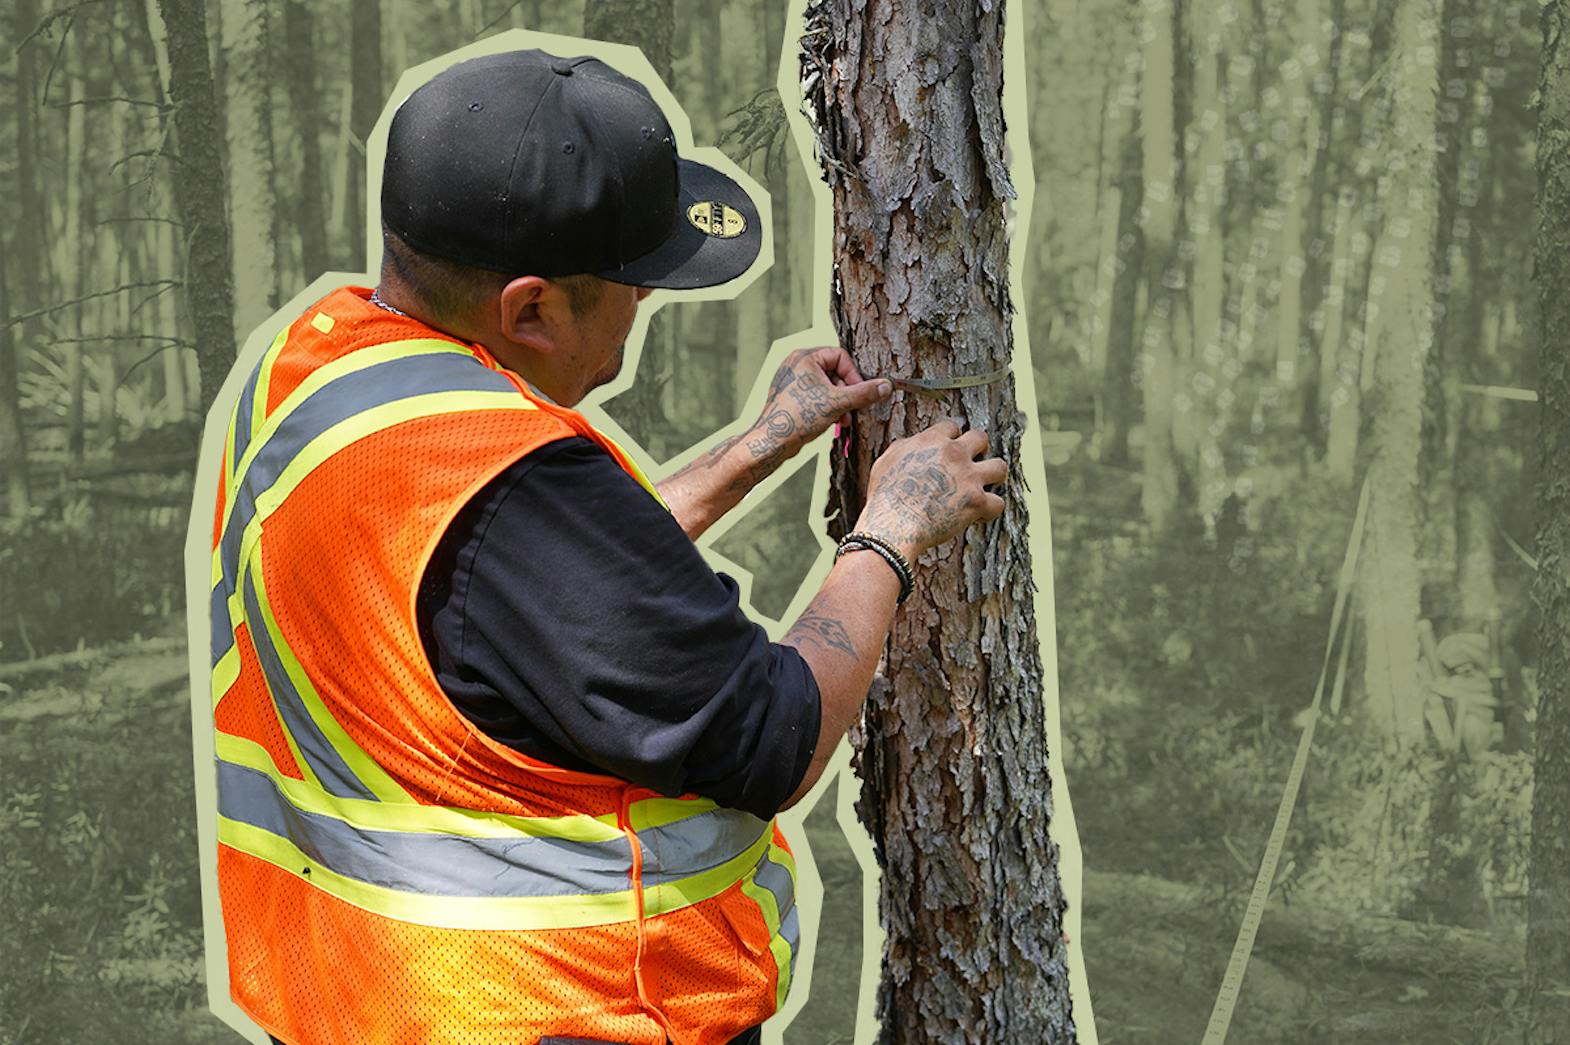 A man wearing an orange safety vest measures the circumference of a tree